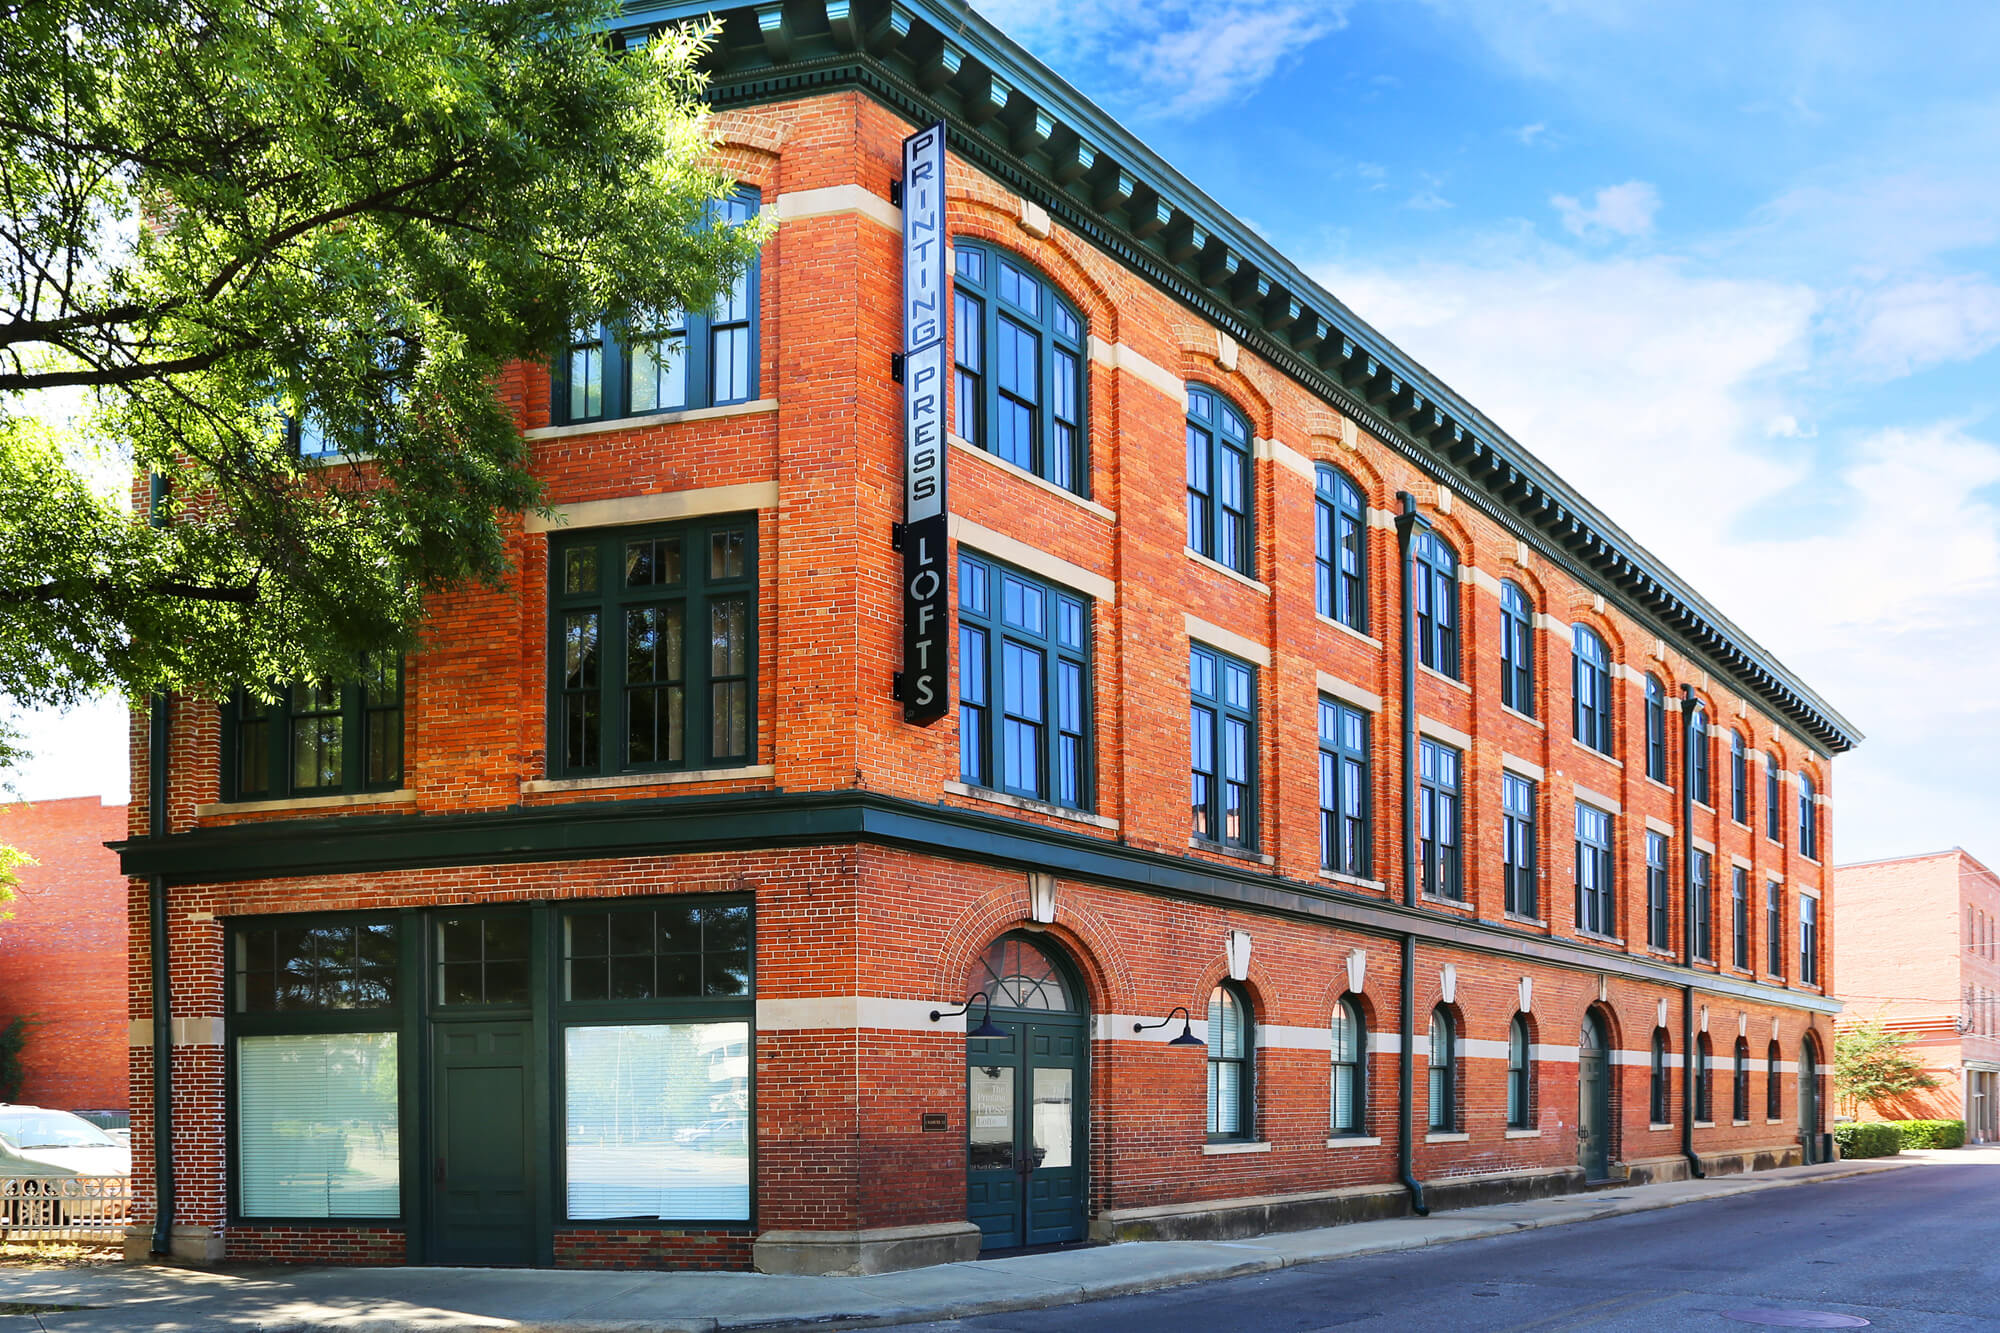 Printing Press Lofts Designed by Foshee Architecture - View of the Exterior